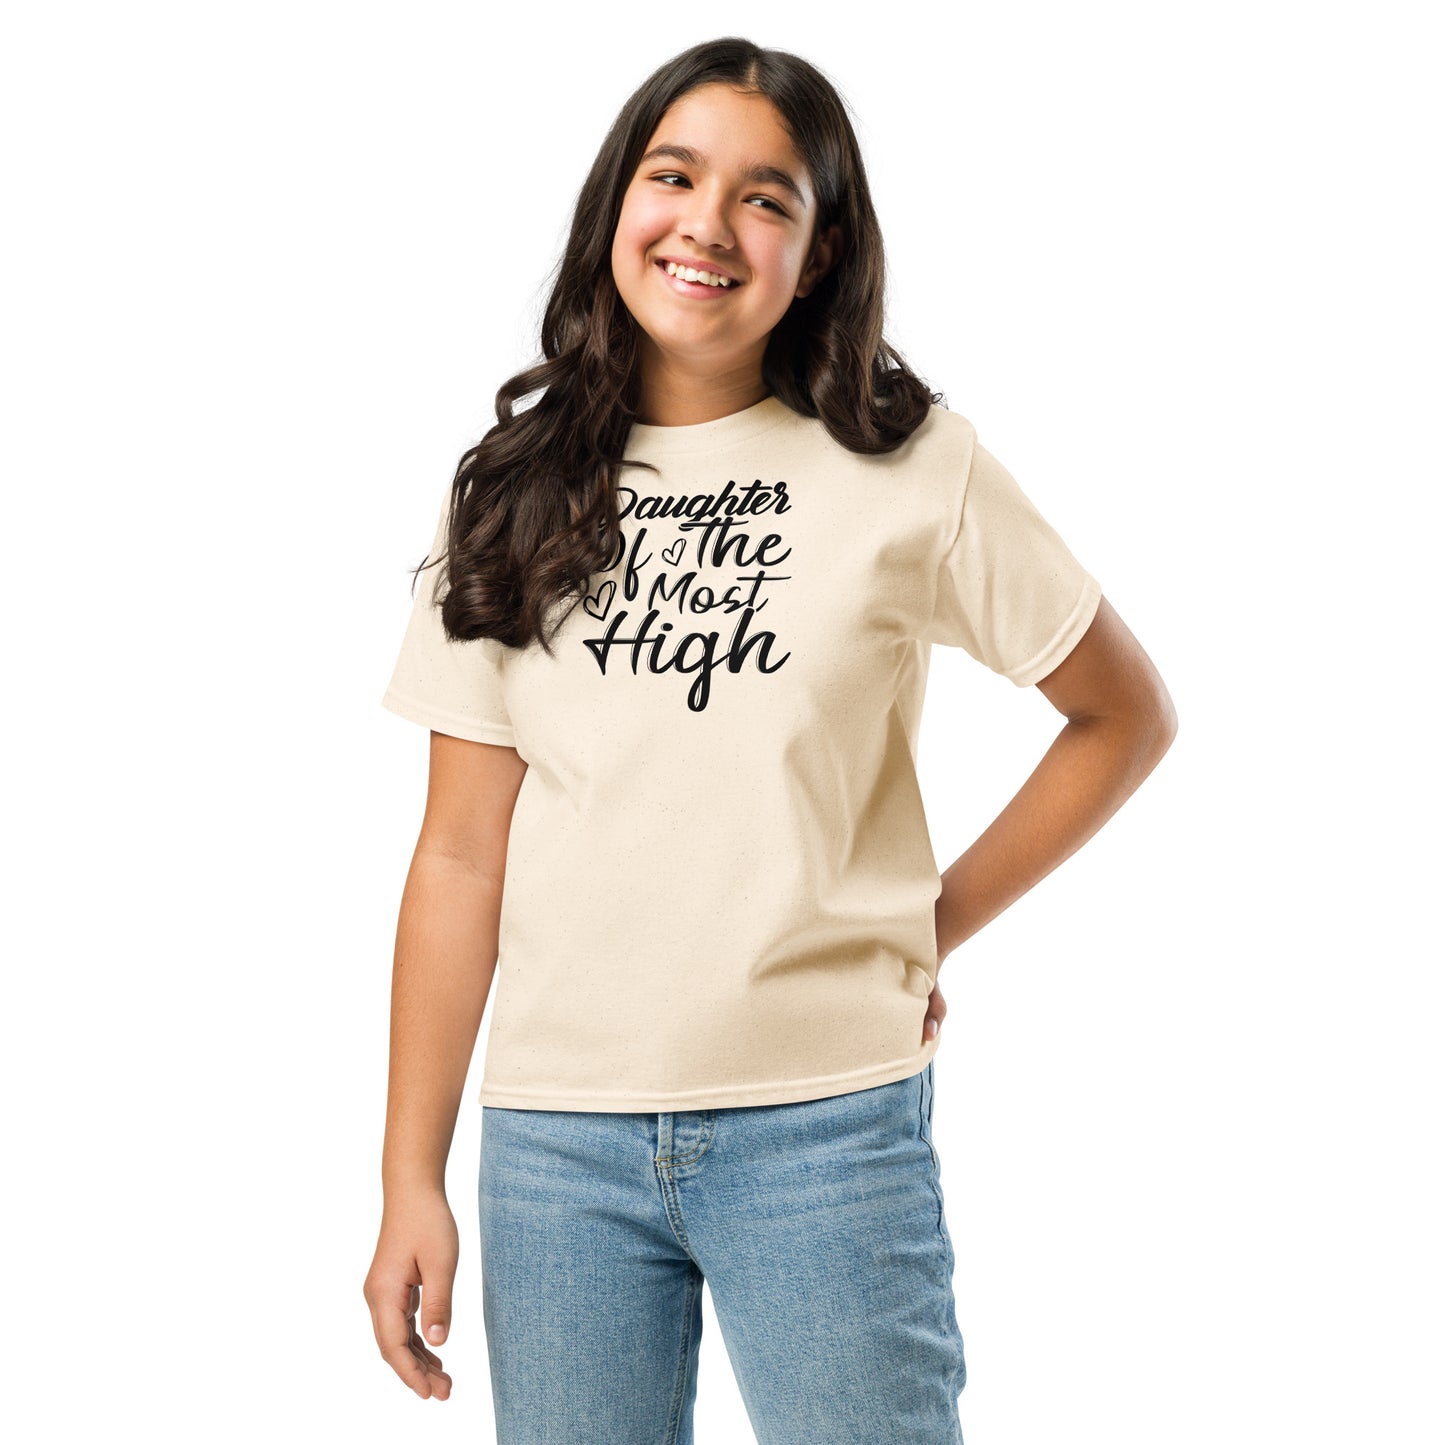 Daughter Of the Most High Youth tee